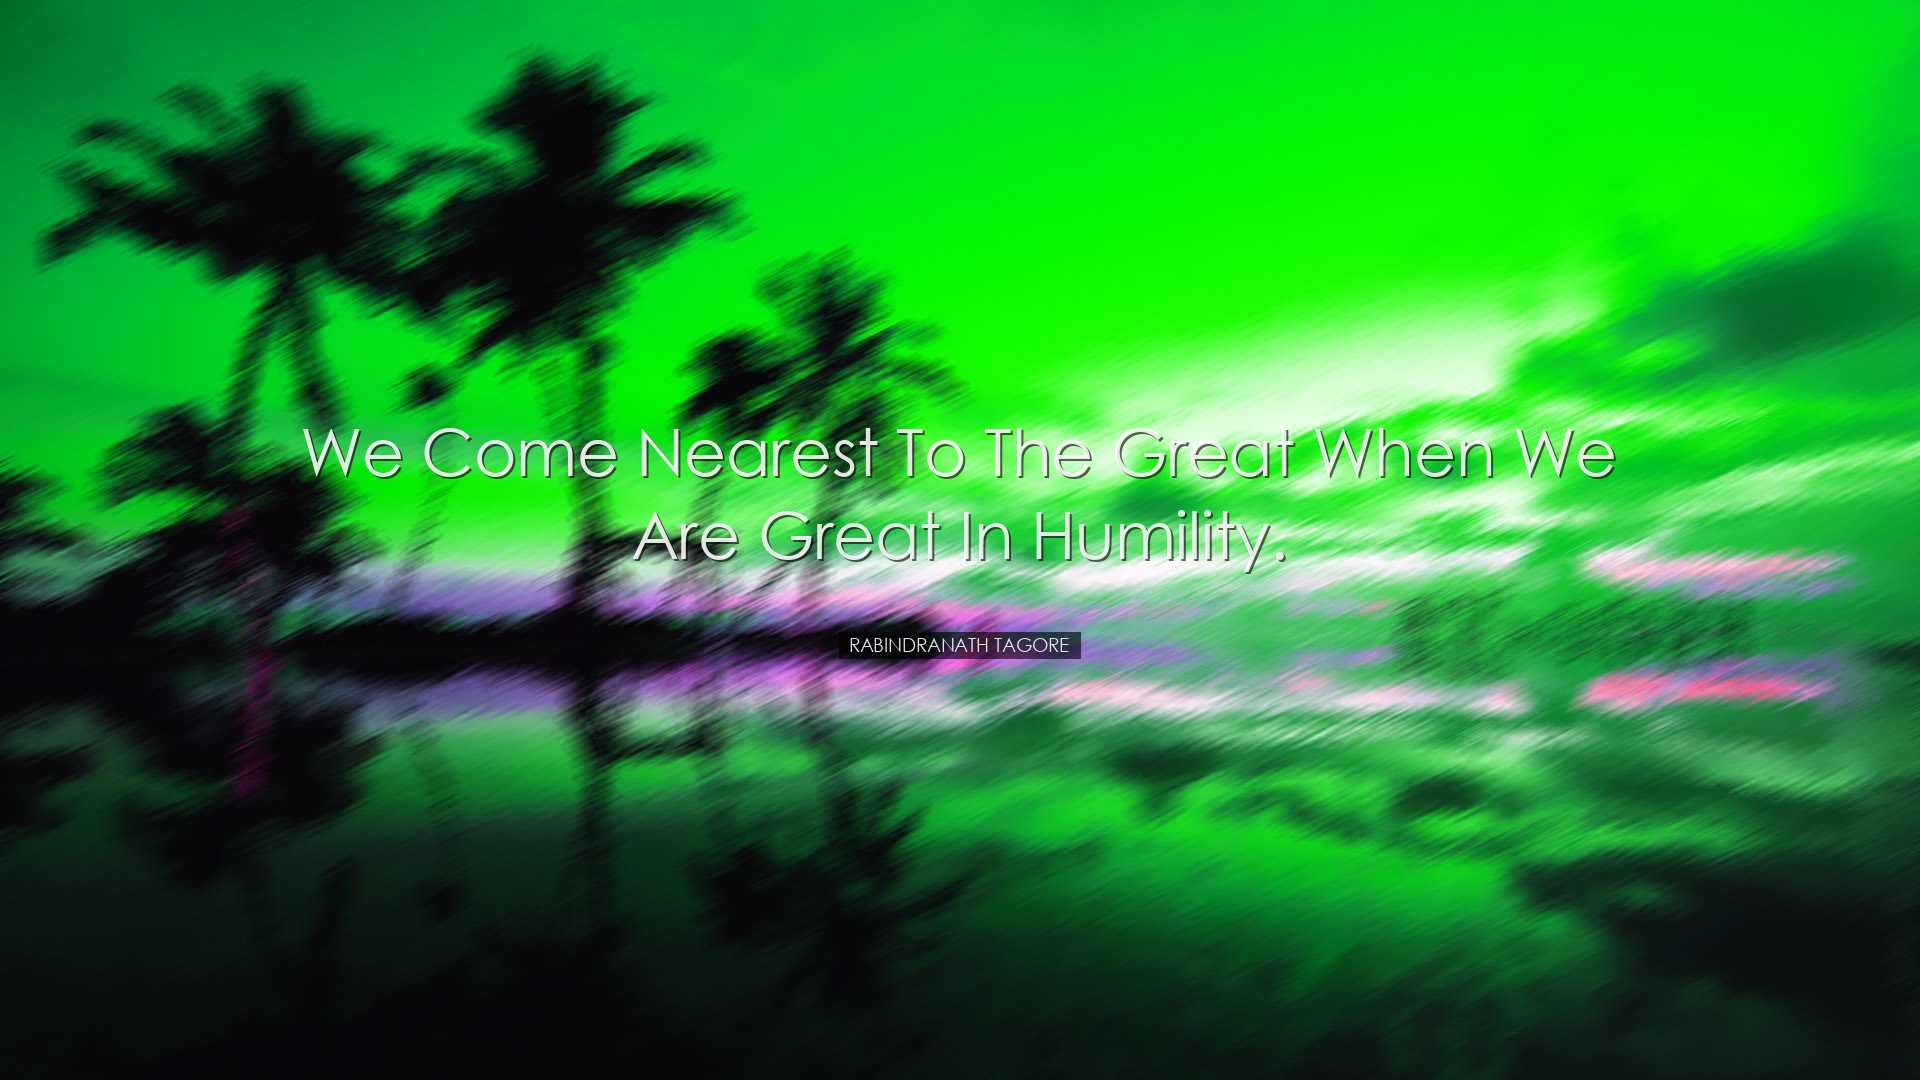 We come nearest to the great when we are great in humility. - Rabi